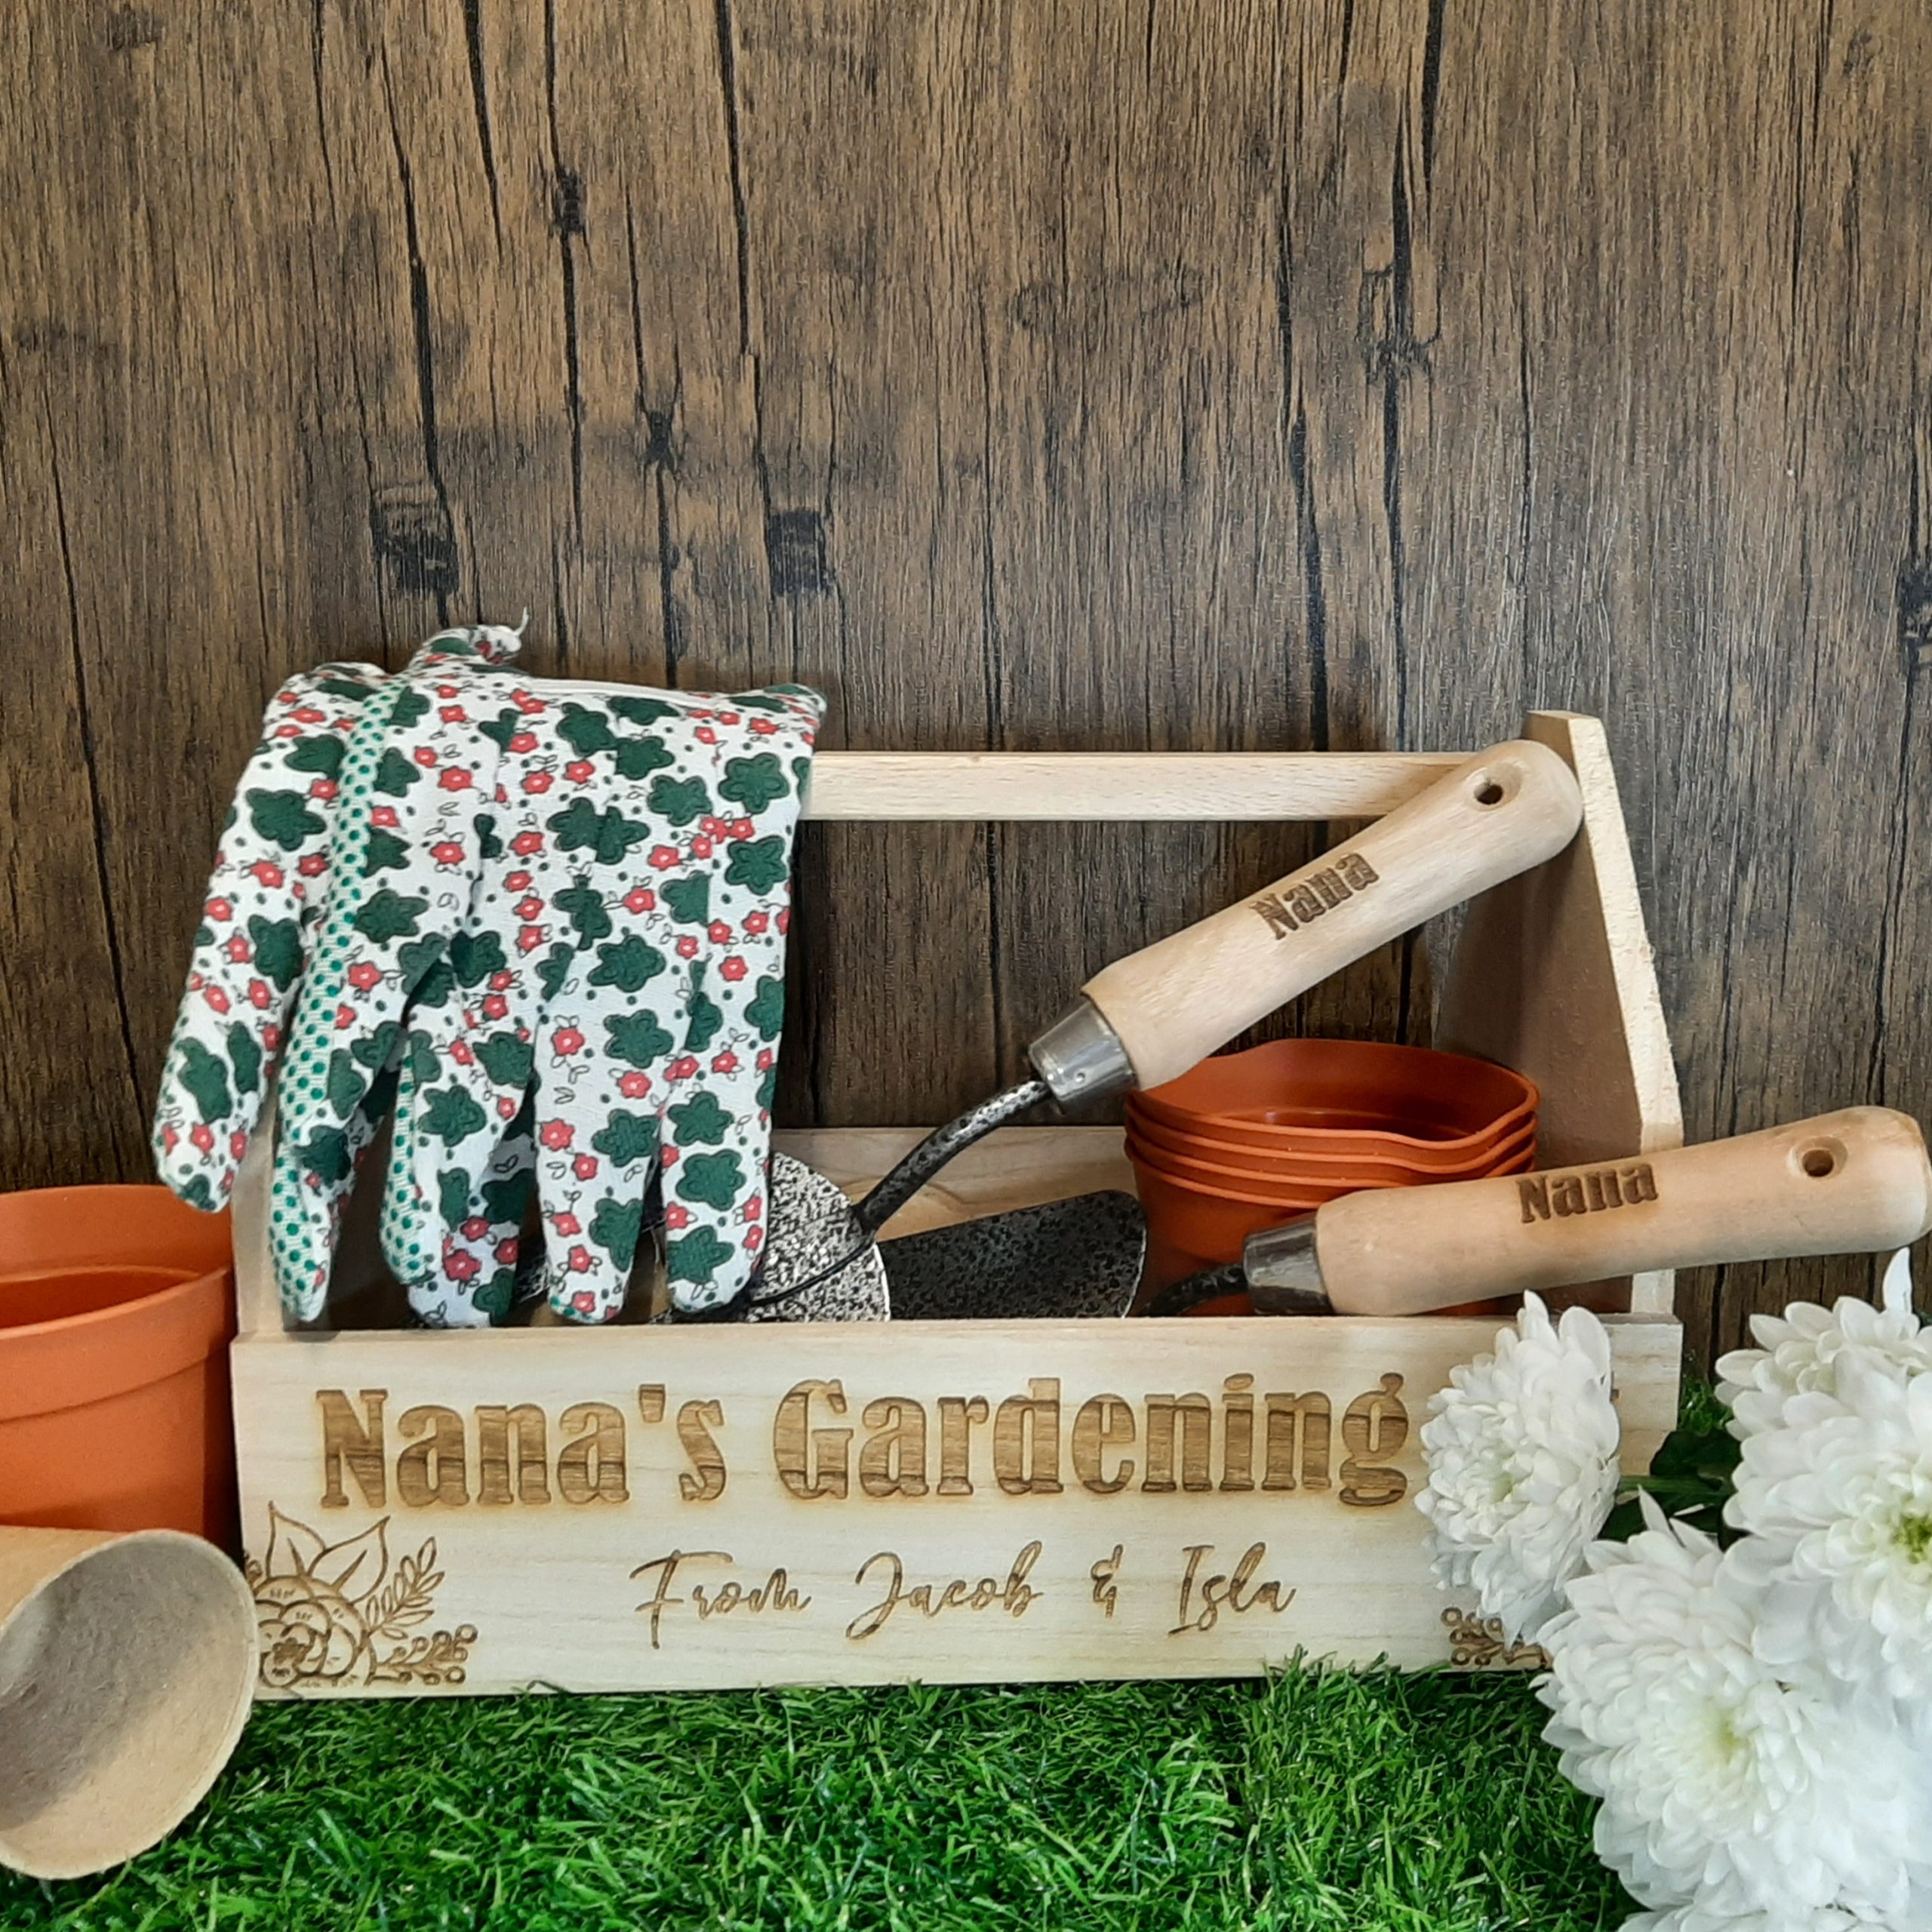 Gardening Kit with Gardening kit and personal message engraved on the box - comes with names on fork and trowel too